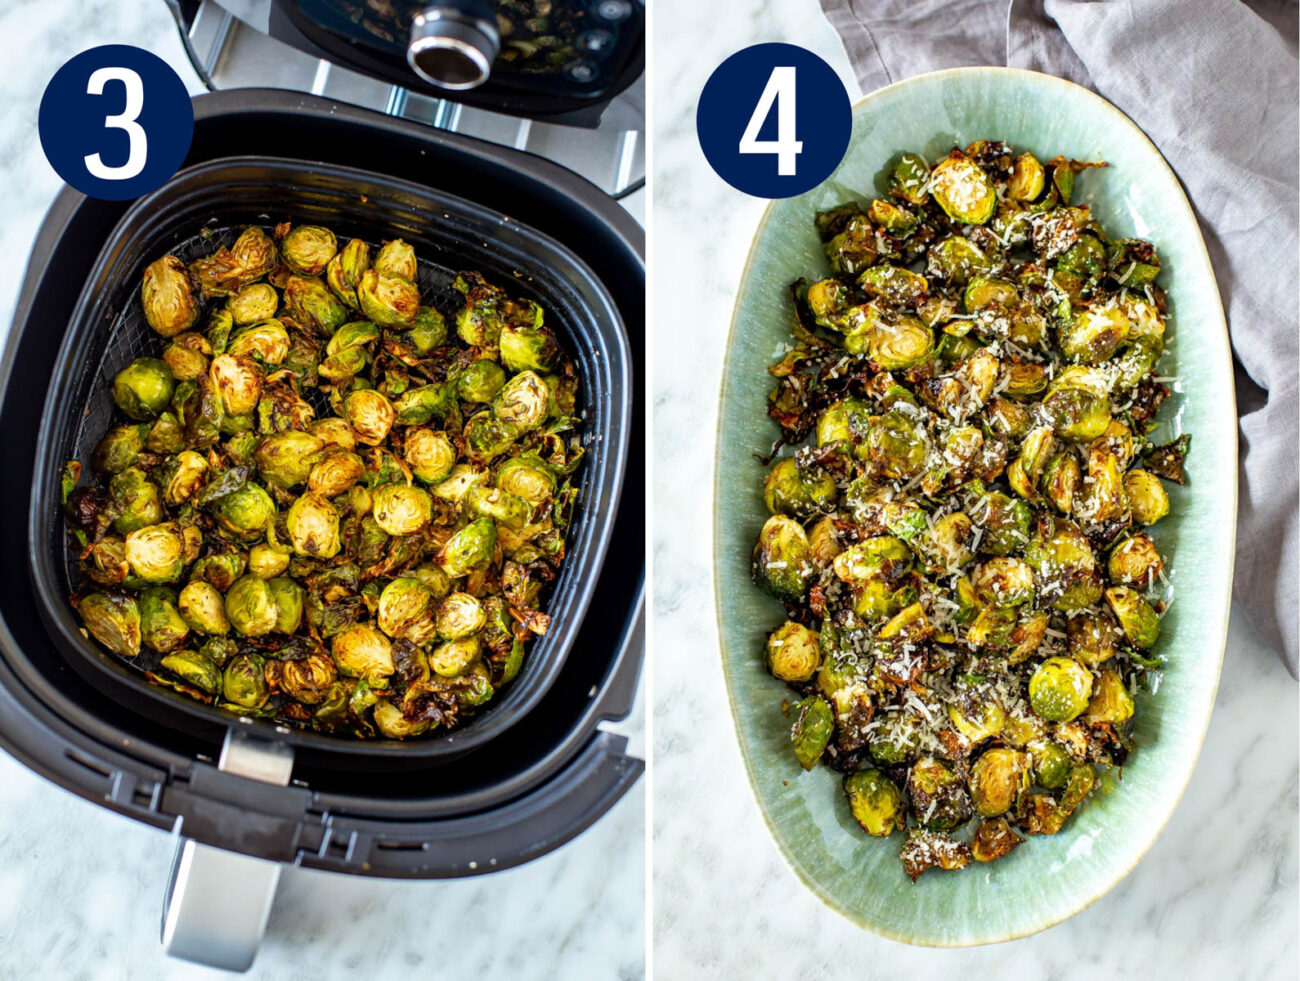 Steps 3 and 4 for making air fryer brussels sprouts: Air fry then toss with parmesan and serve.